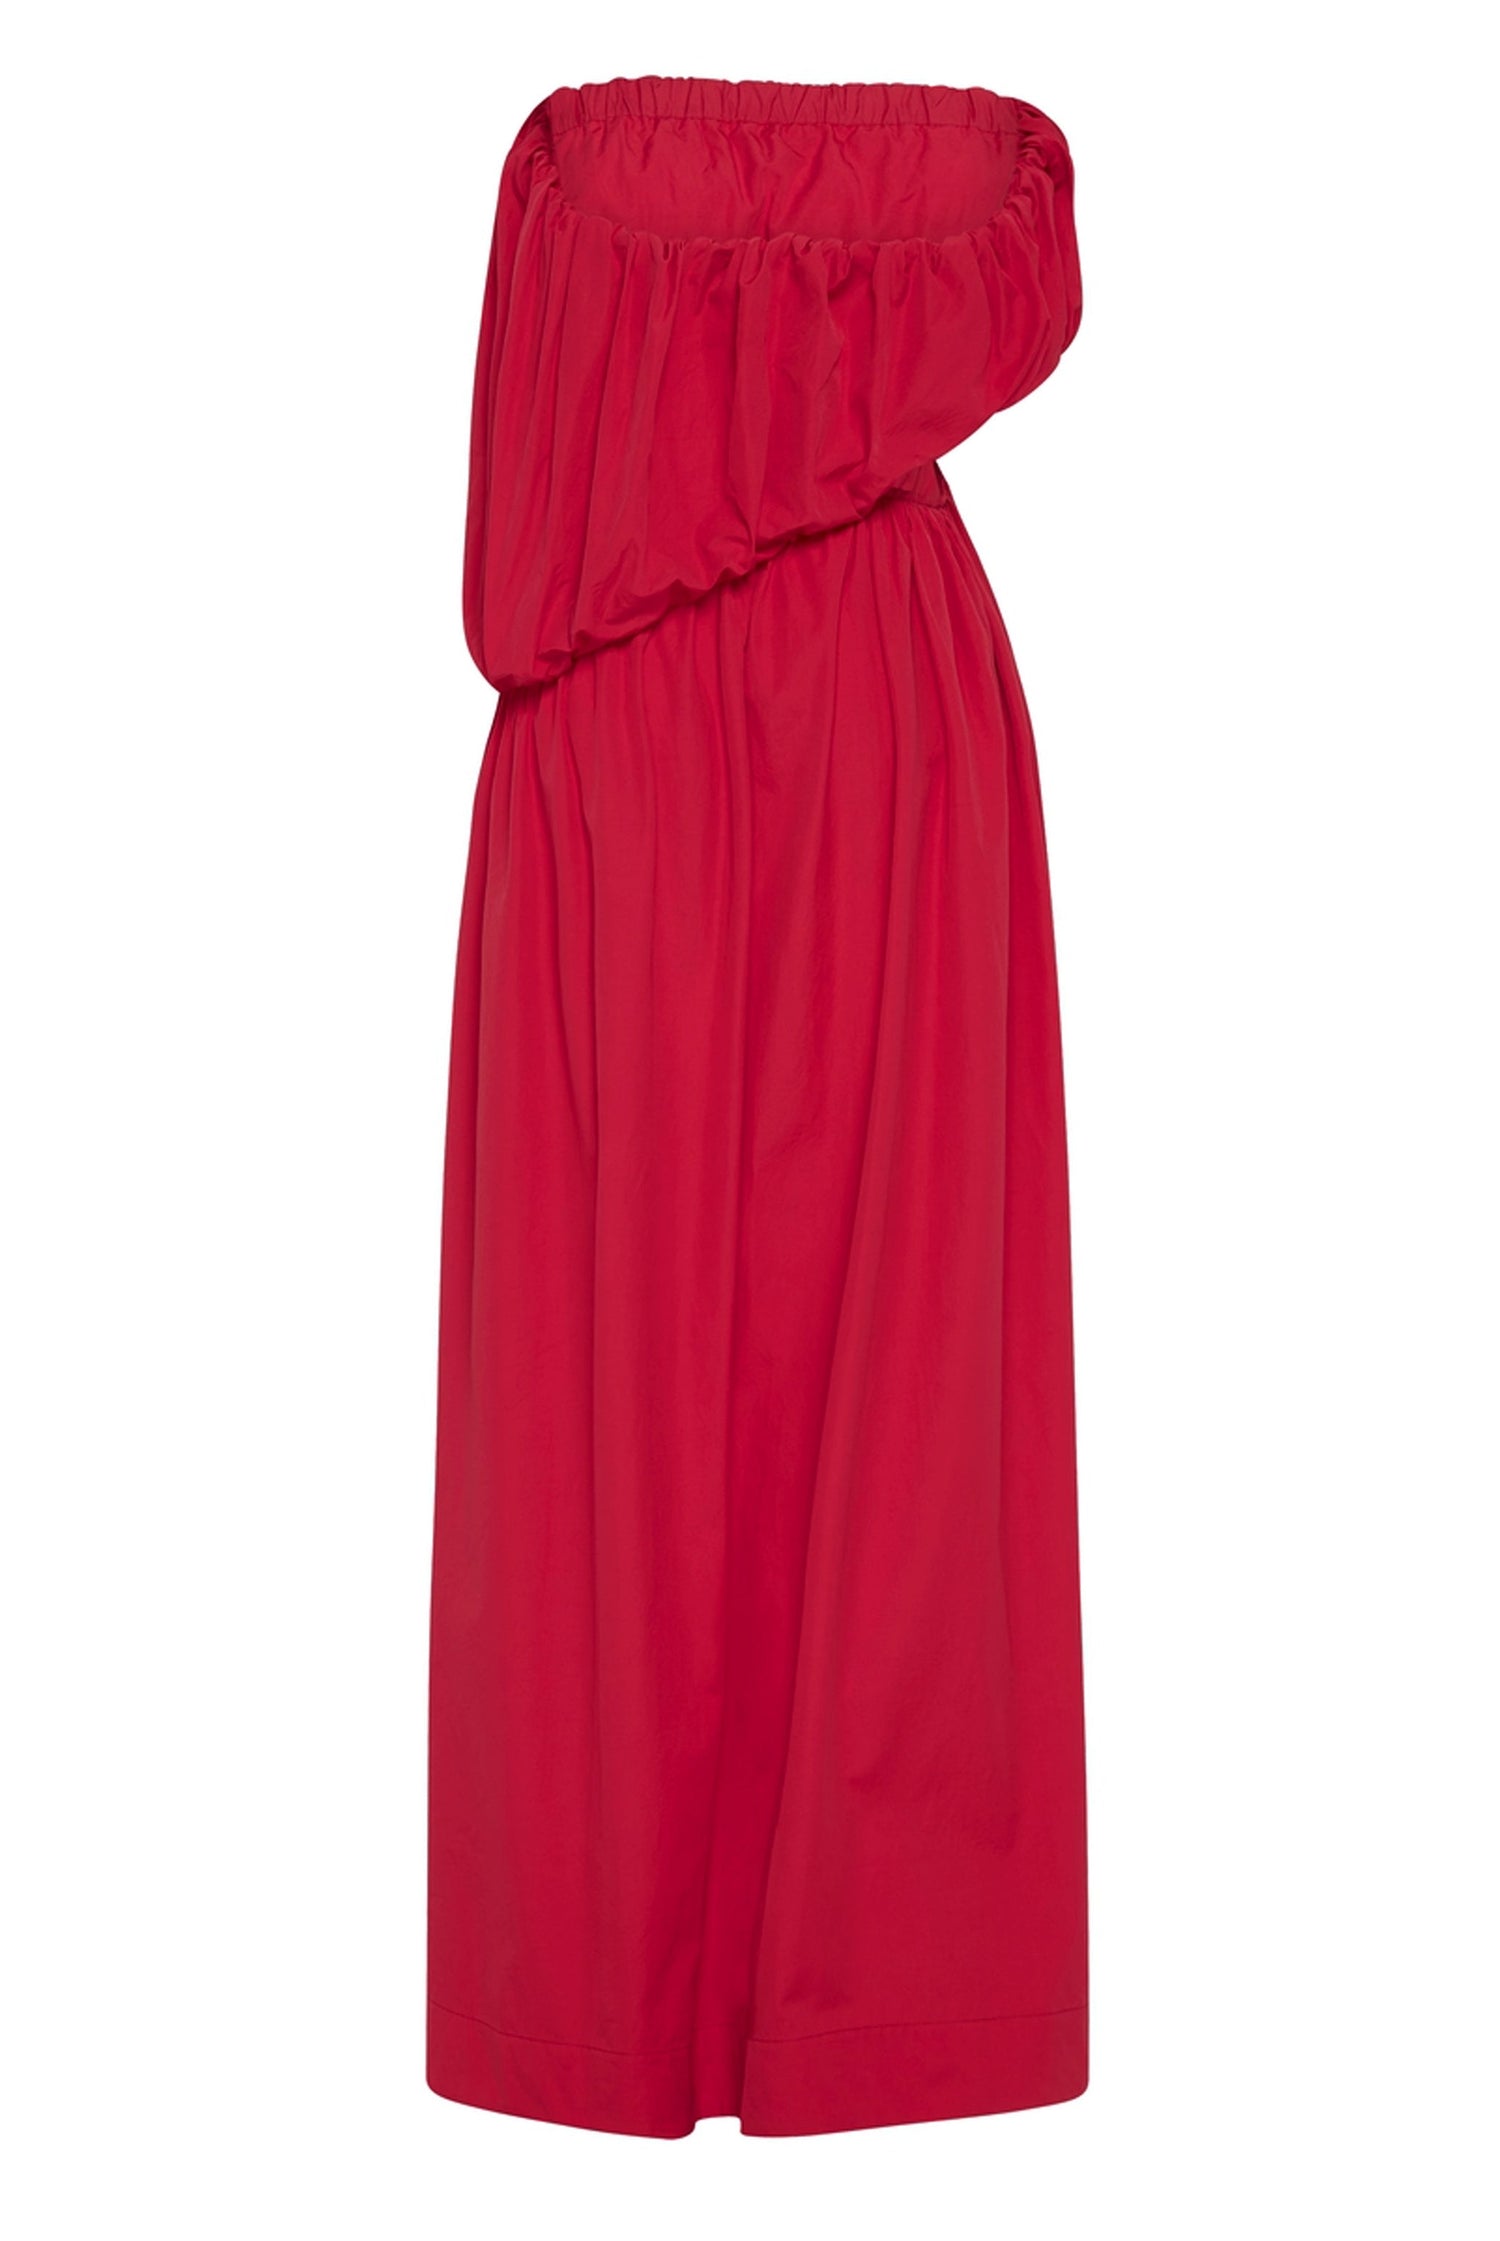 ESSE - STRAPLESS COTTON CUT OUT MIDI DRESS - RED Product shot